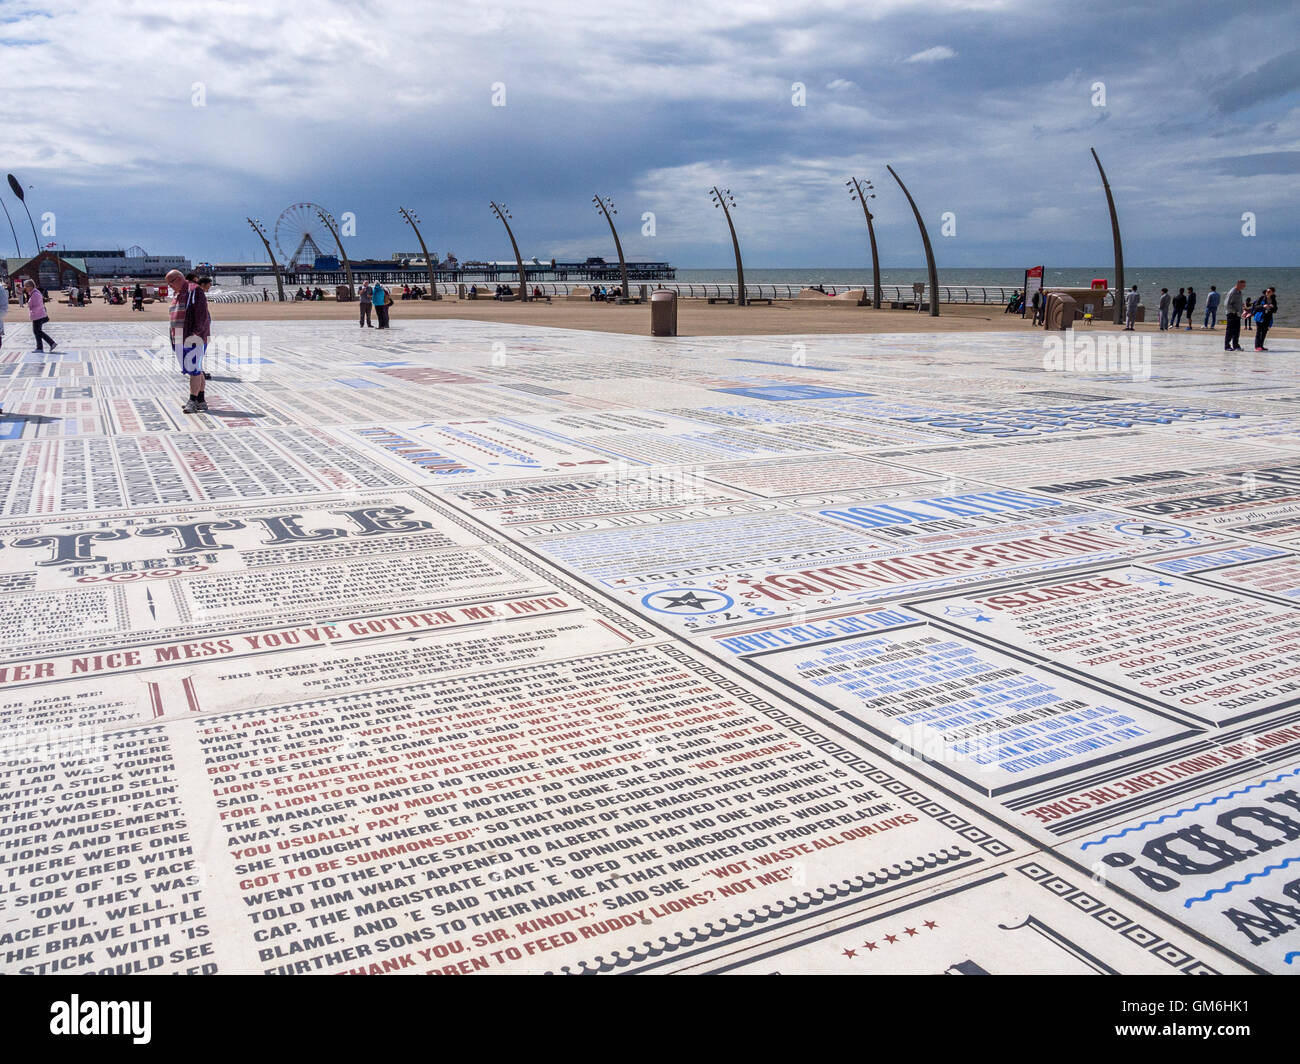 Comedy Carpet outside Blackpool tower. Stock Photo